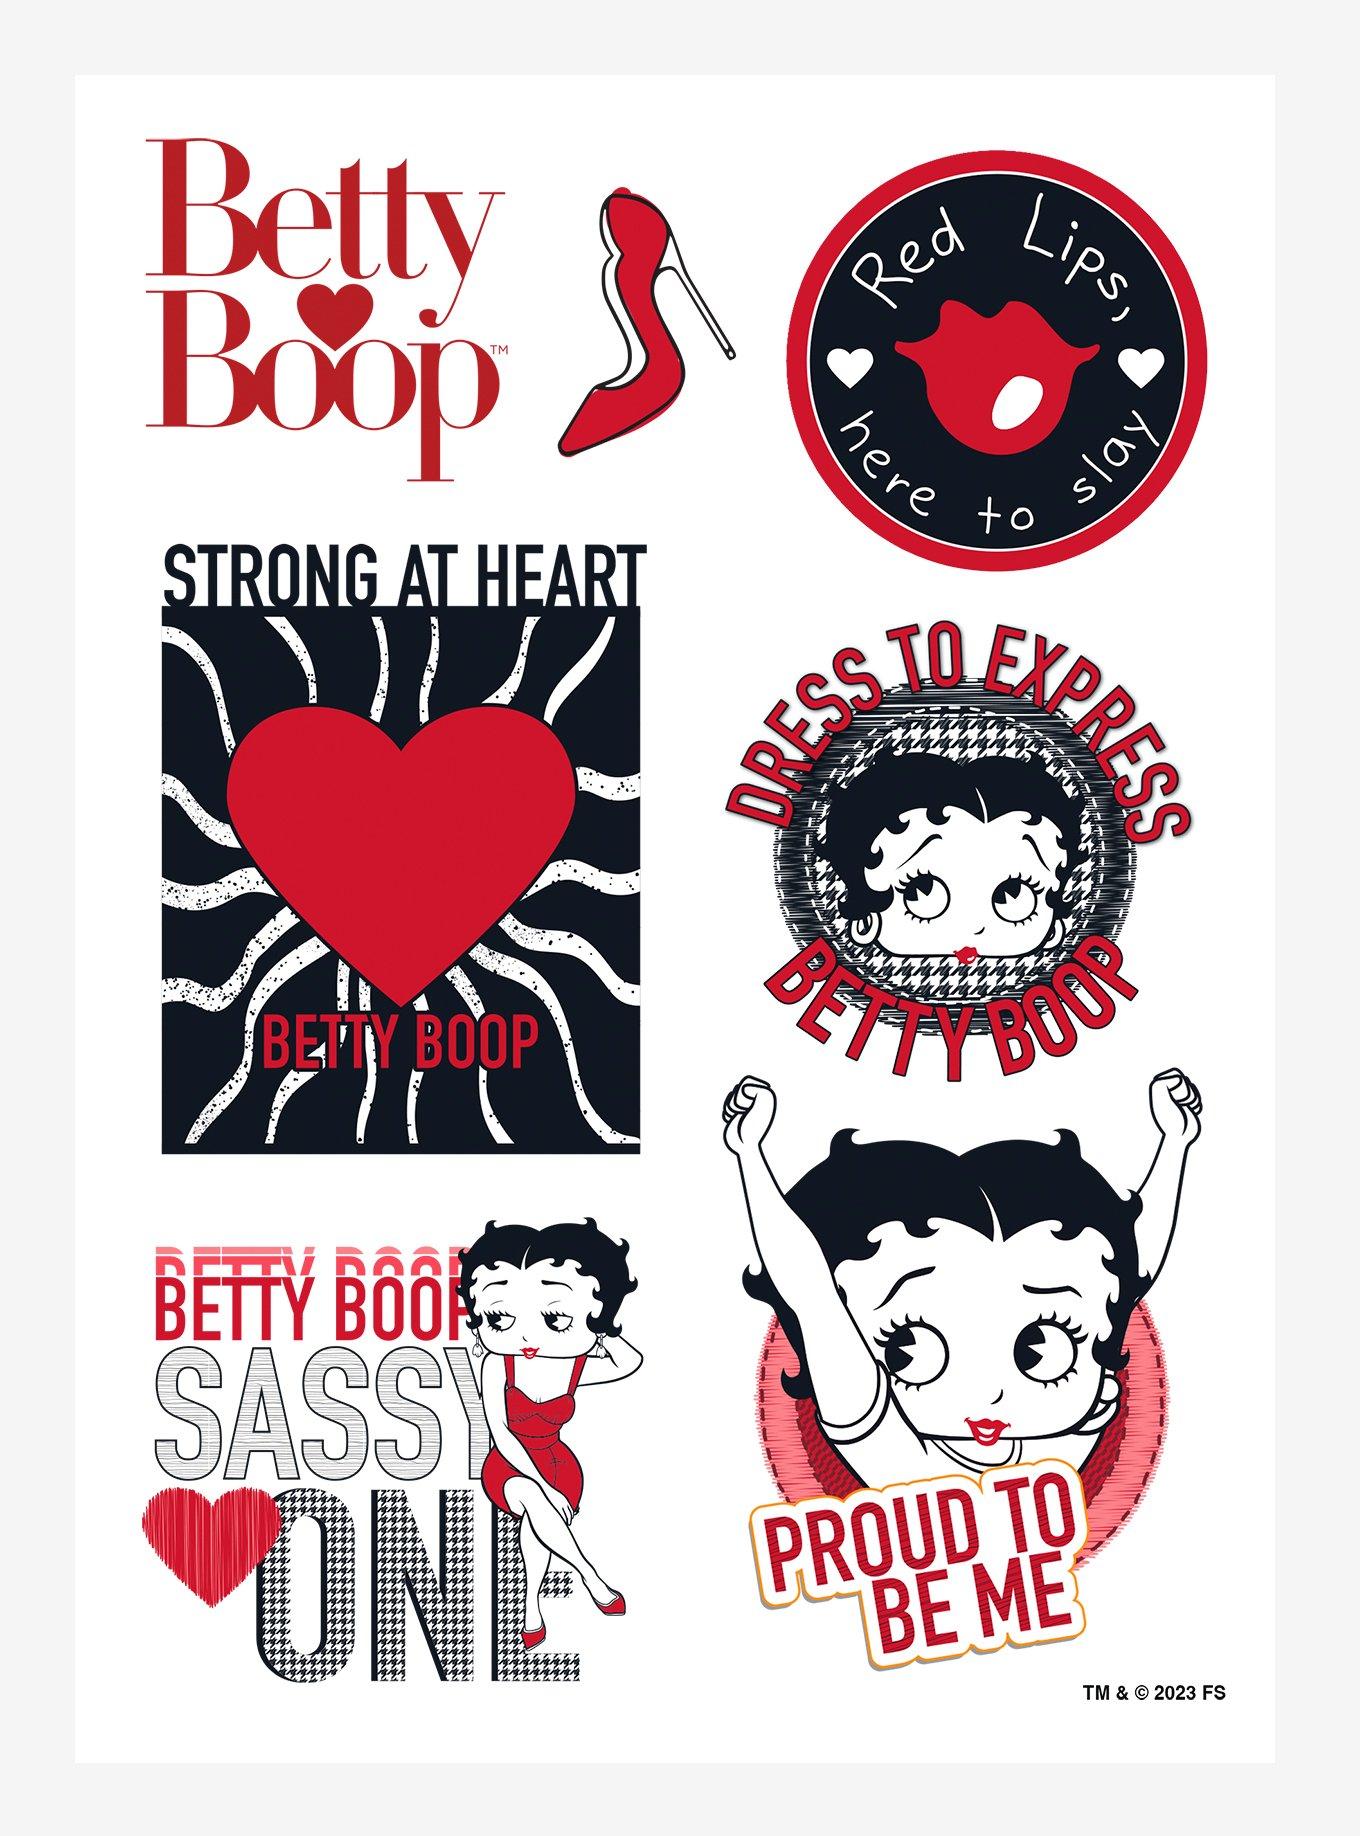 Supernatural Valentine's Day Stickers and Decal Sheets | LookHUMAN